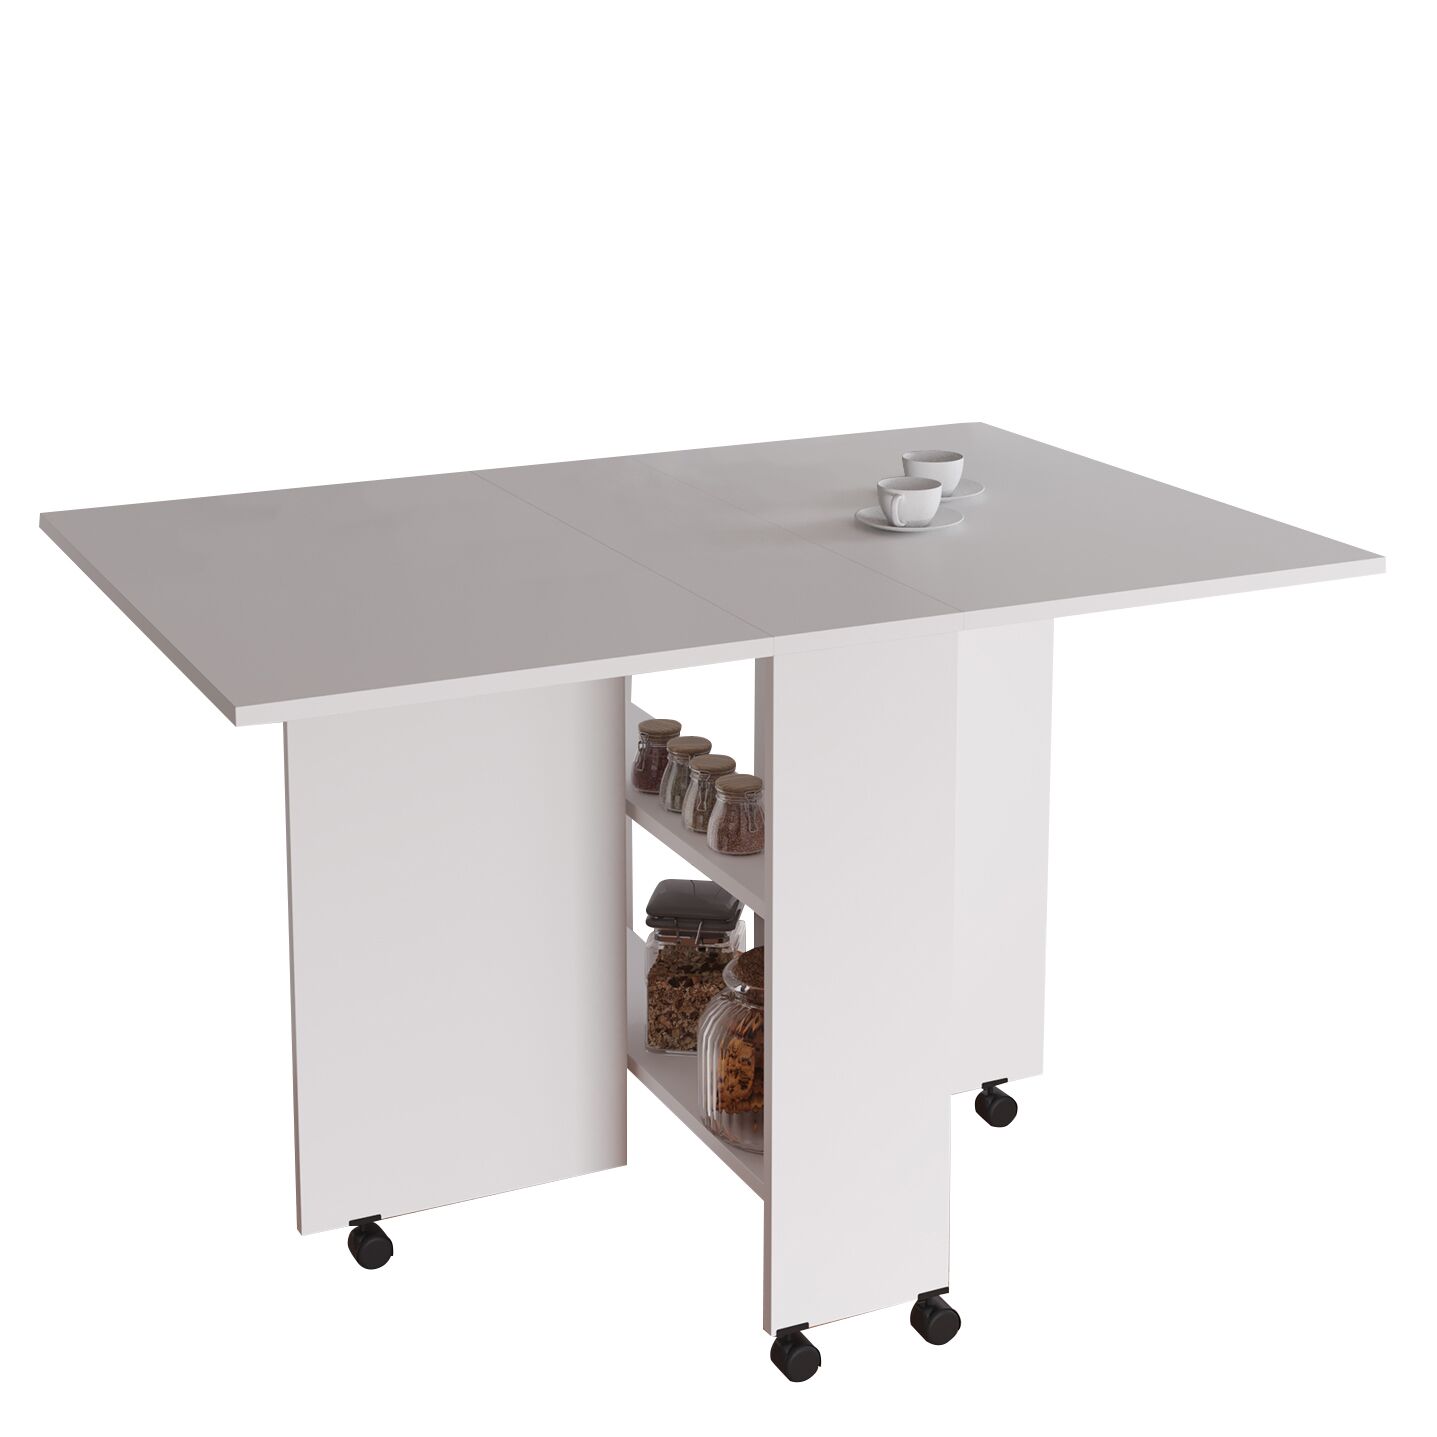 STANLEY Folding Table With Wheels White Chipboard 120x80x73cm